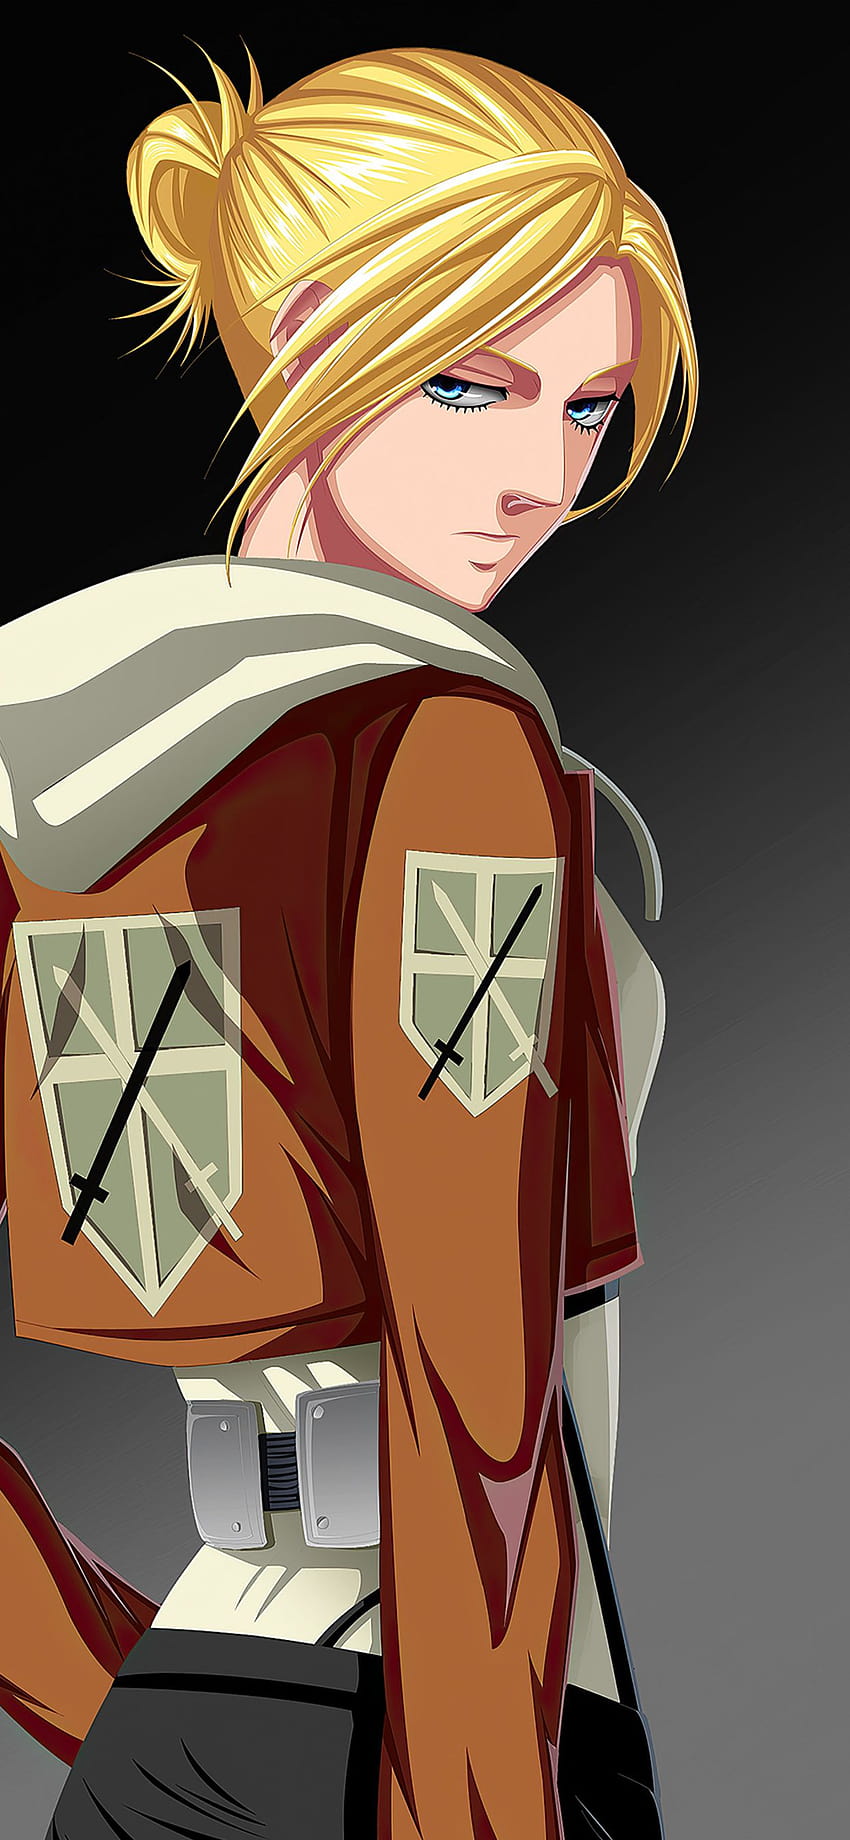 1242x2688 進撃の巨人 アニー・レオンハート 新劇の巨人 Iphone XS MAX , Backgrounds, and, android aot HD電話の壁紙